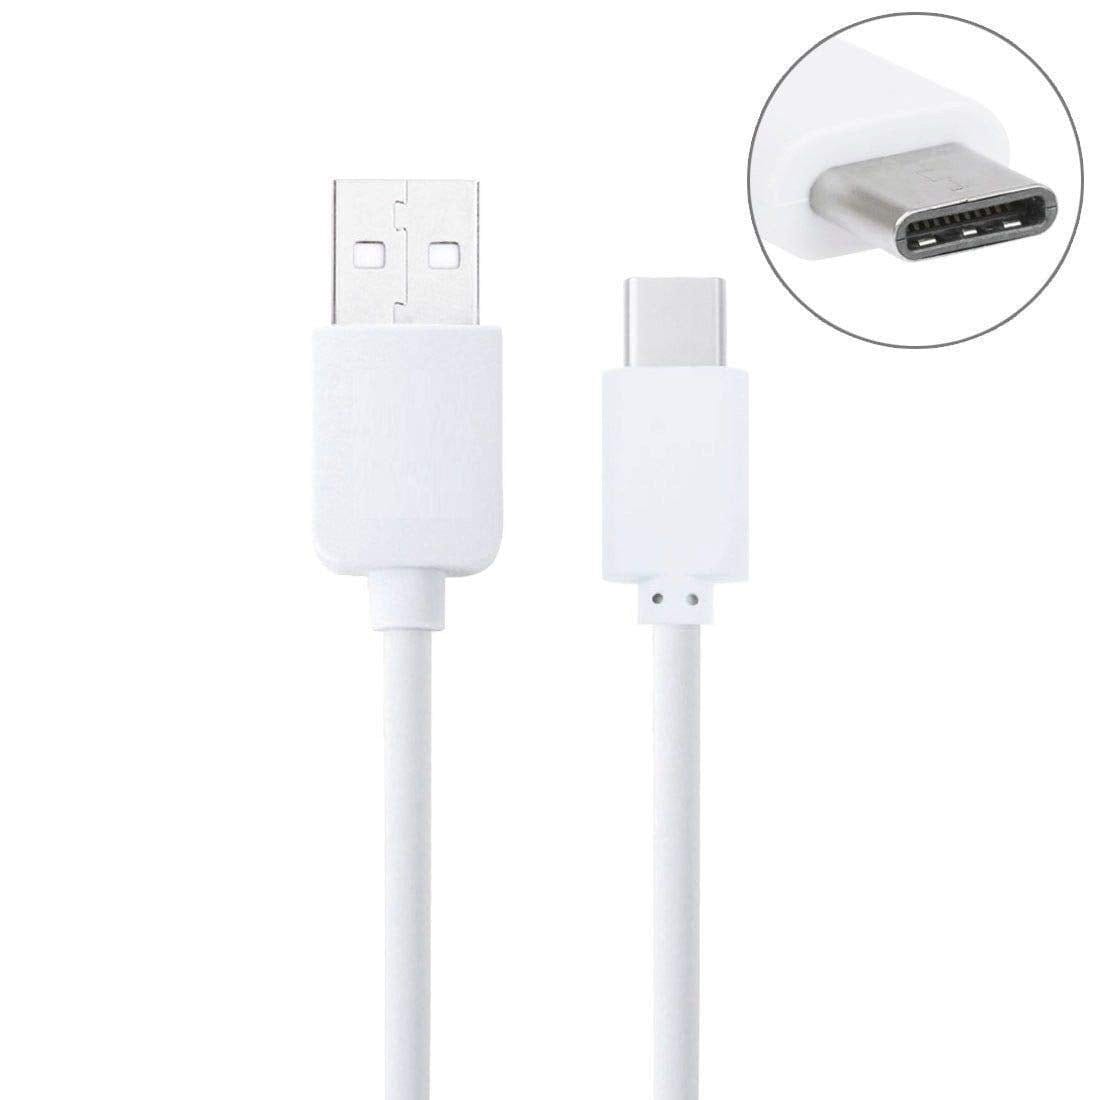 Samsung Galaxy A70 USB to Type C Charging Cable In Car White - 50 CM Short - SmartPhoneGadgetUK